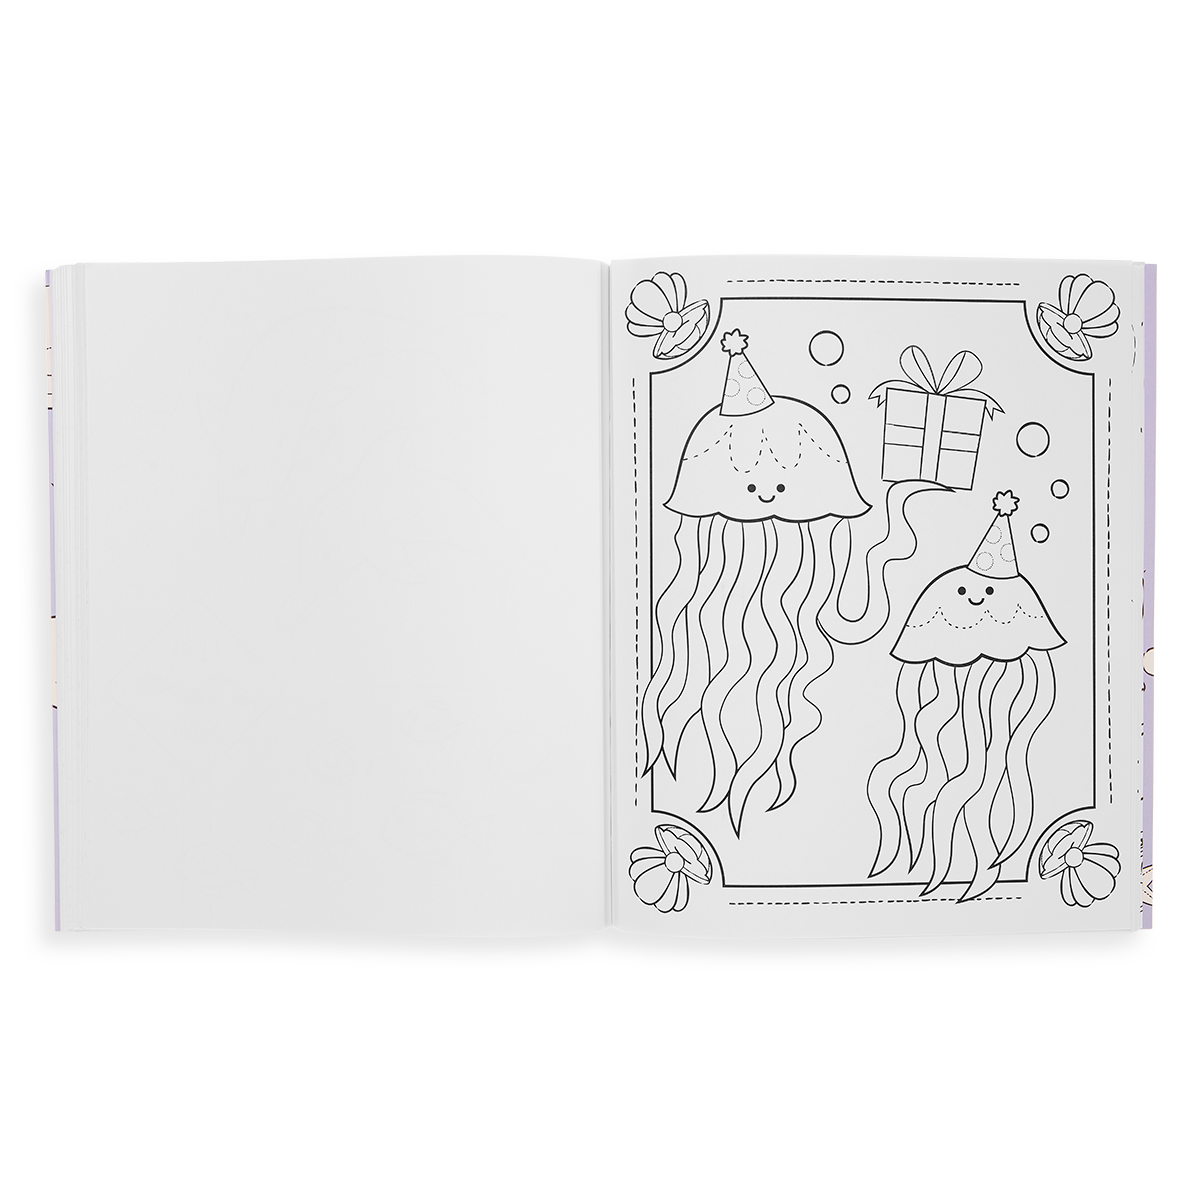 A coloring page from Outrageous Ocean Coloring Book showing jelly fish at Birthday party